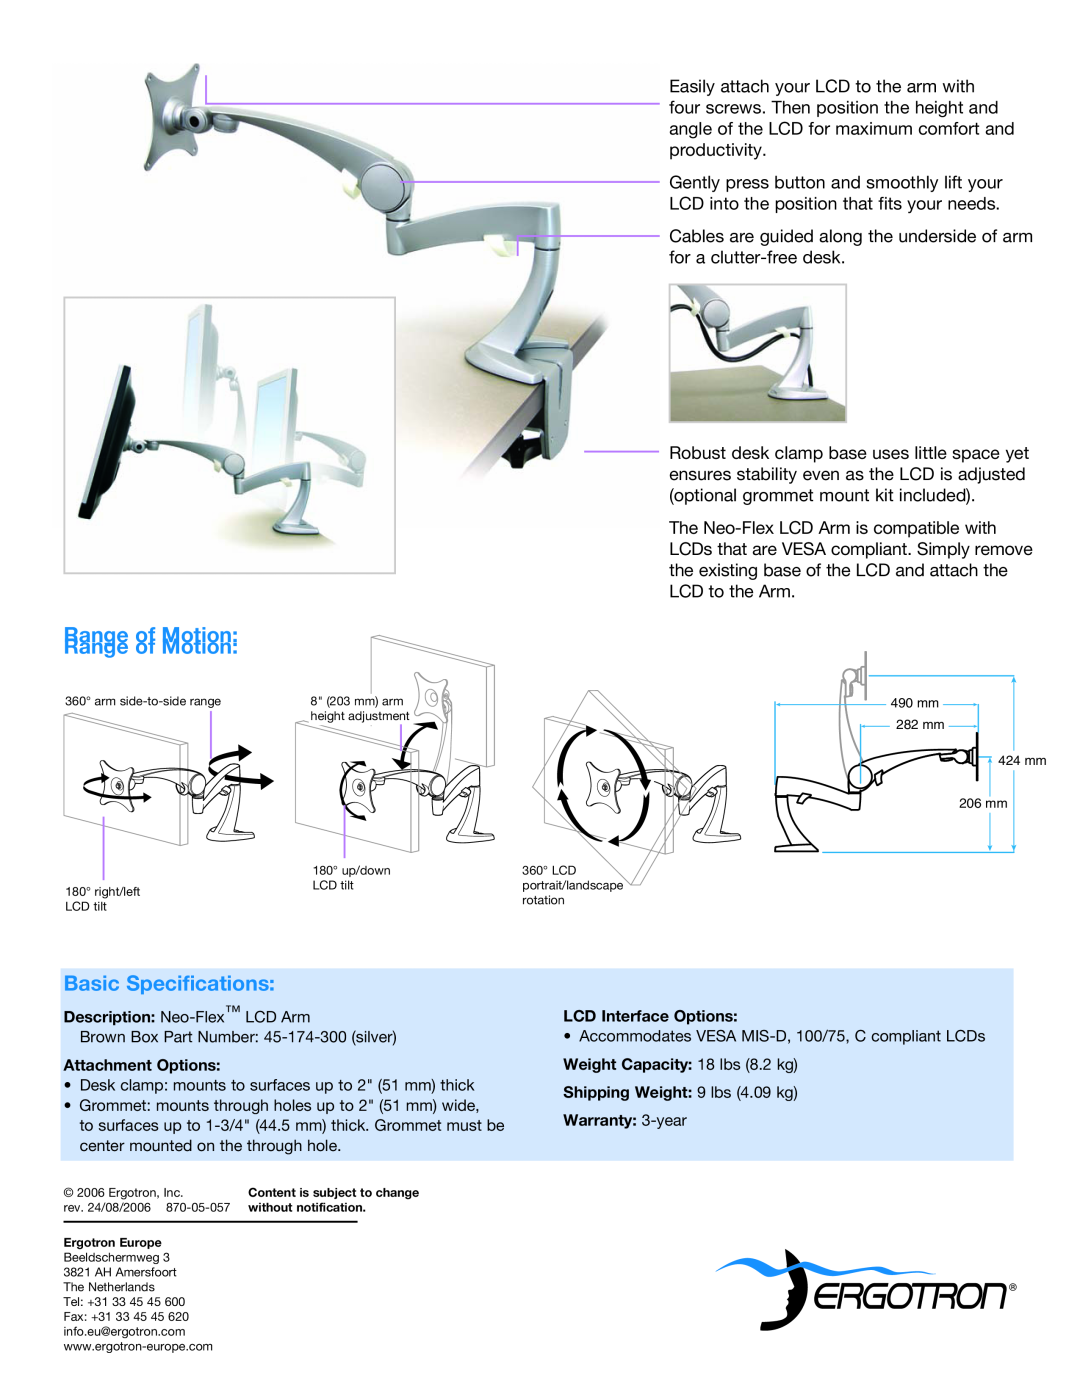 Ergotron LCD Arm manual Range of Motion Range of Motion, Basic Specifications, Attachment Options, LCD Interface Options 